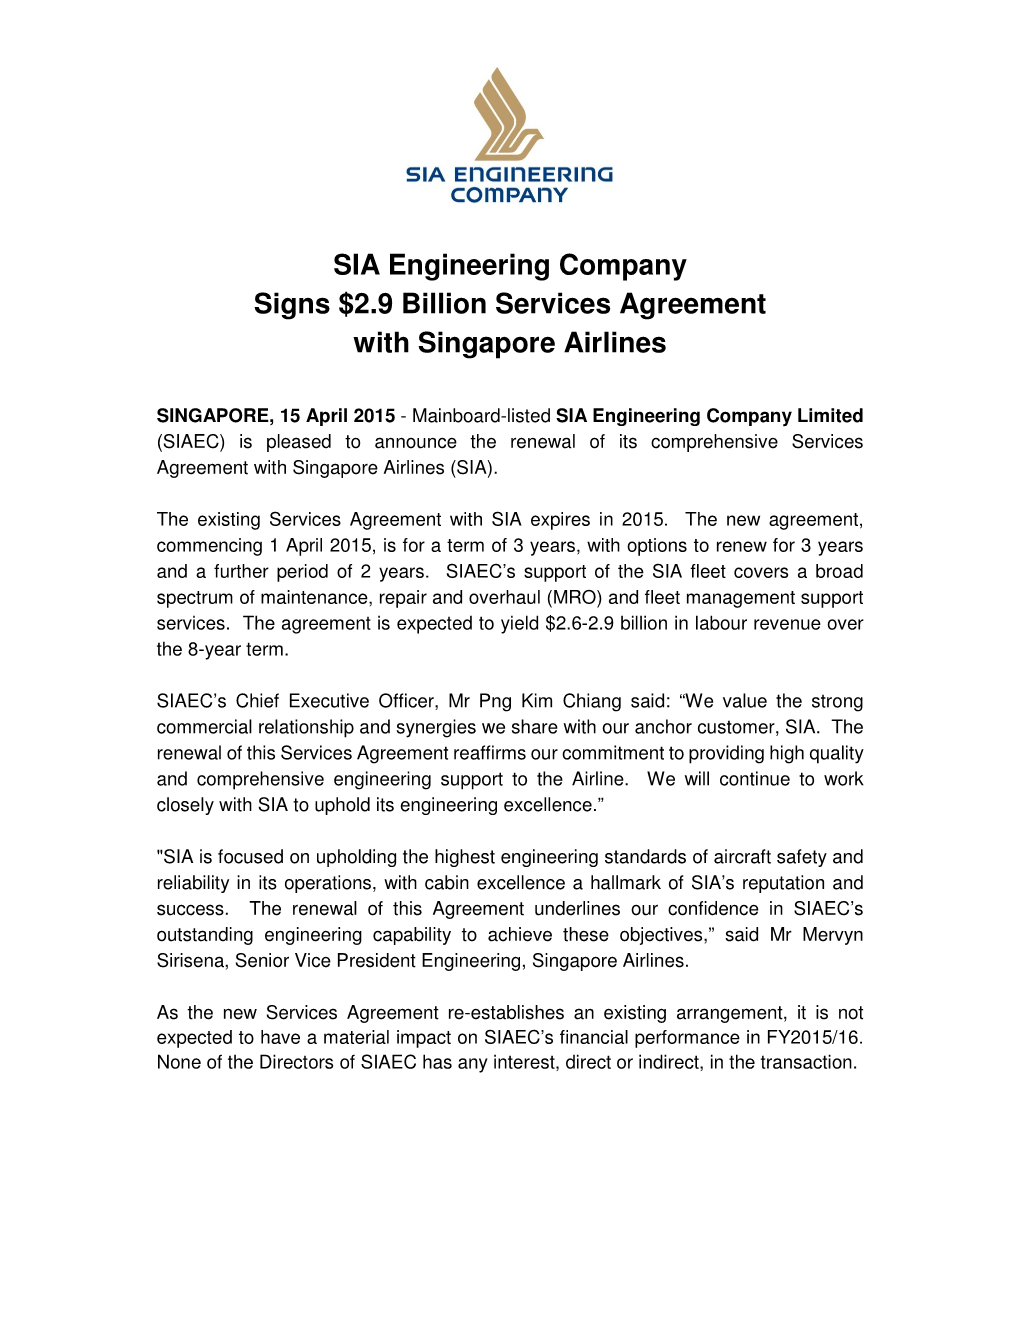 SIA Engineering Company Signs $2.9 Billion Services Agreement with Singapore Airlines